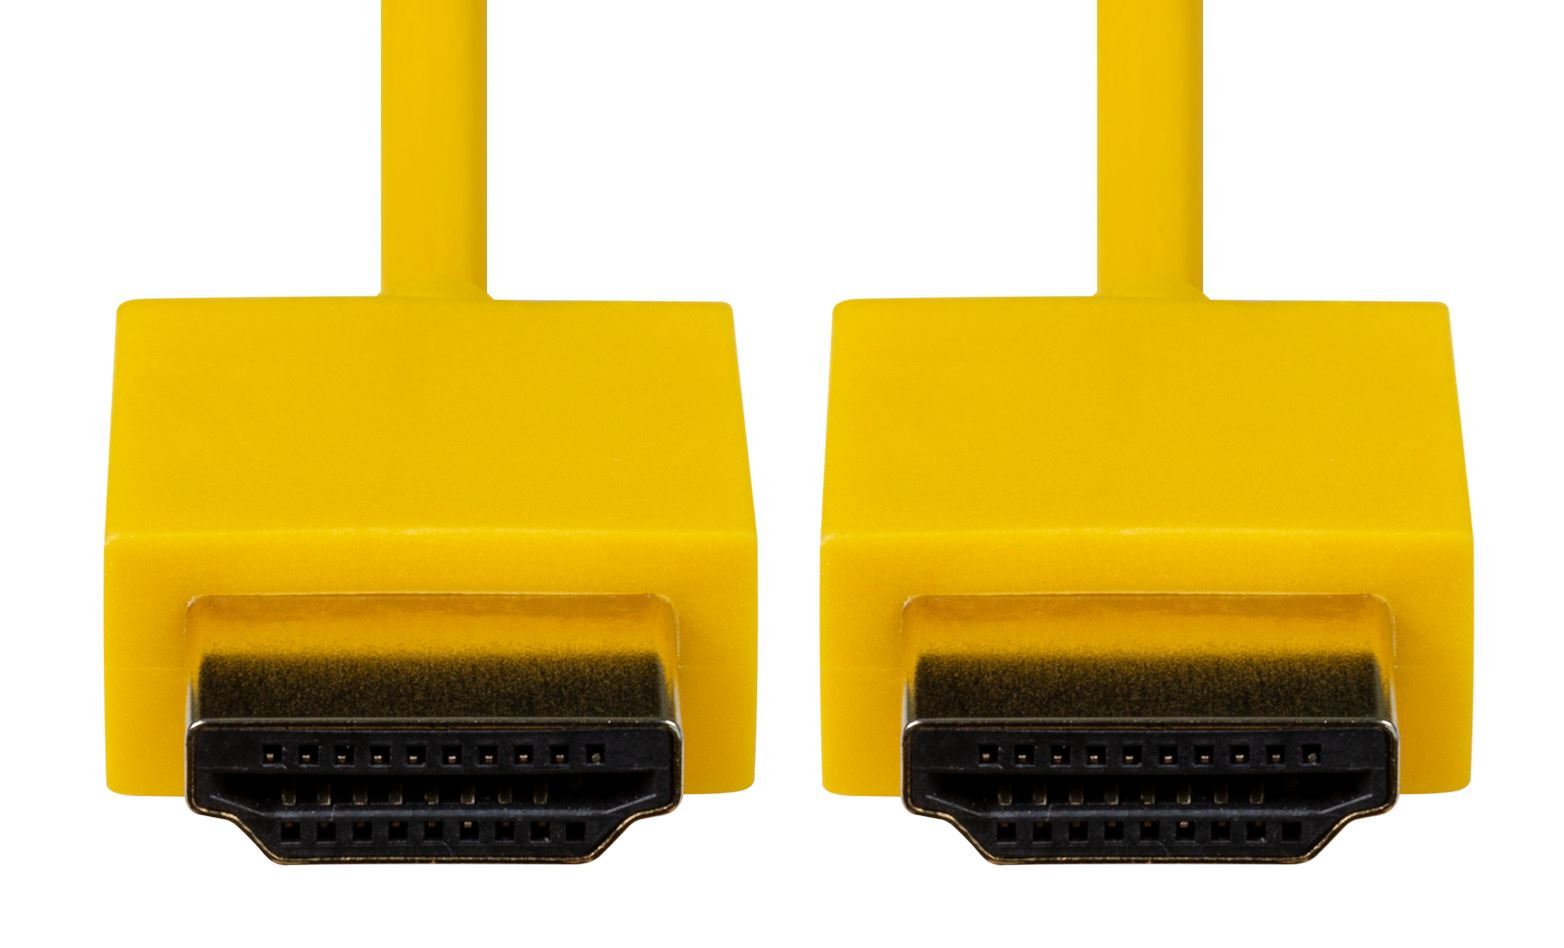 DYNAMIX_1M_HDMI_YELLOW_Nano_High_Speed_With_Ethernet_Cable._Designed_for_UHD_Display_up_to_4K2K@60Hz._Slimline_Robust_Cable._Supports_CEC_2.0,_3D,_&_ARC._Supports_Up_to_32_July_ON_SALE_-_Up_to_50%_OFF 800